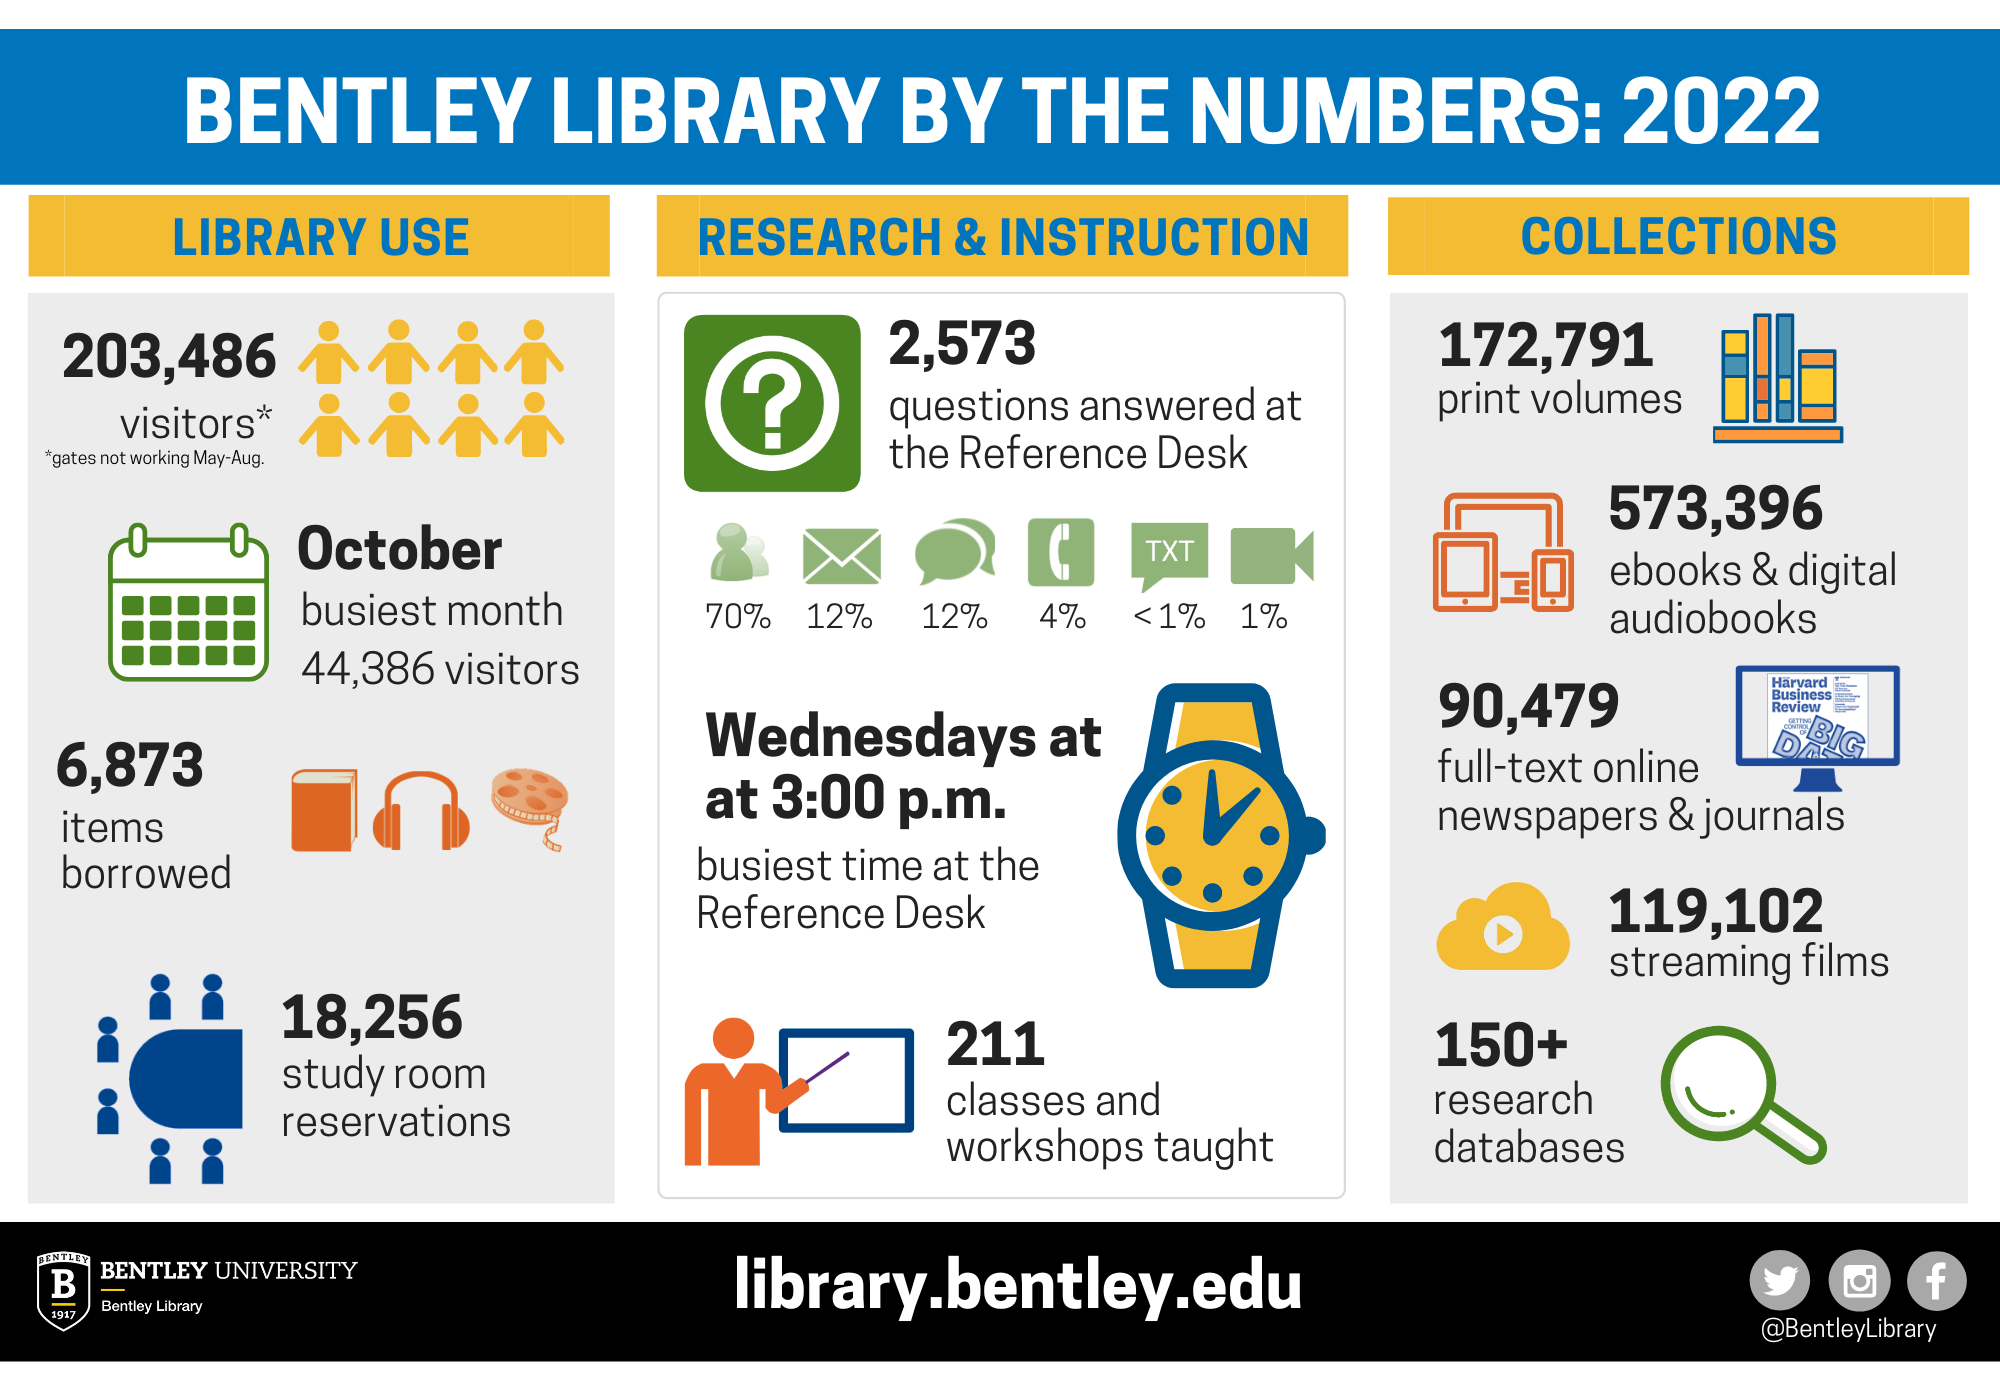 Bentley Library by the Numbers infographic